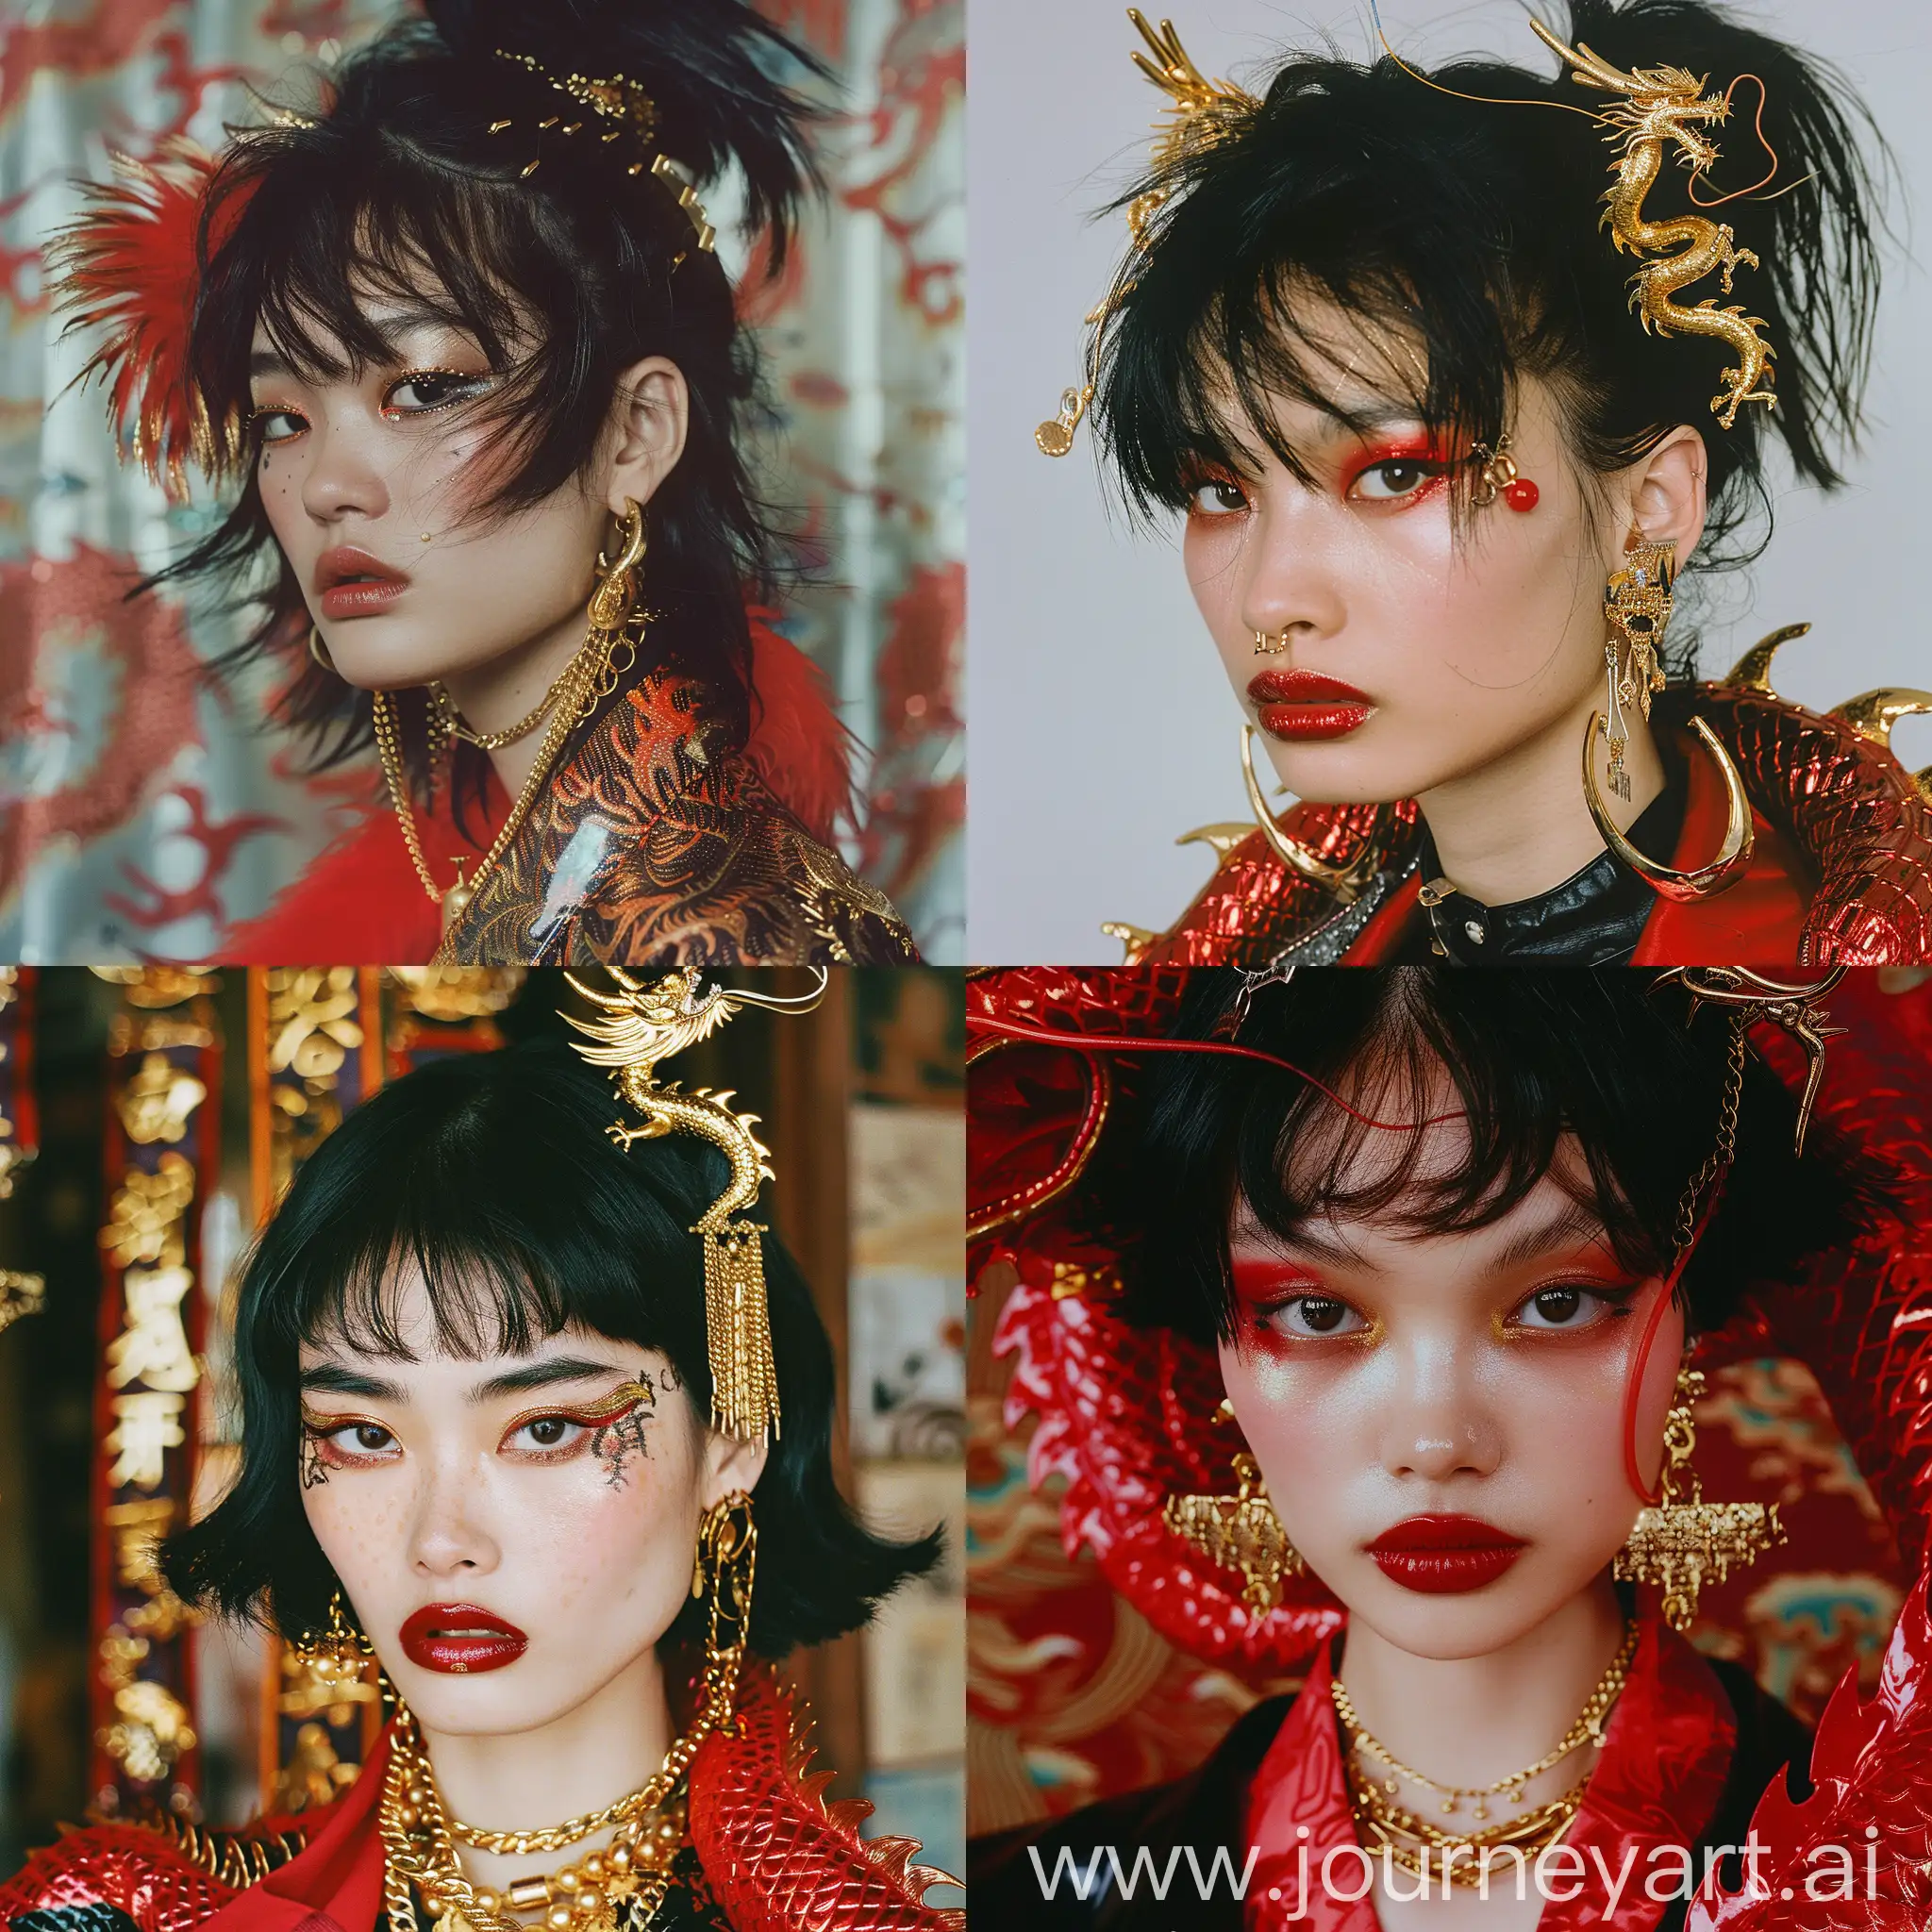 MulanInspired-Punk-Makeup-Japanese-Grunge-with-Red-Dragon-and-Golden-Jewelry